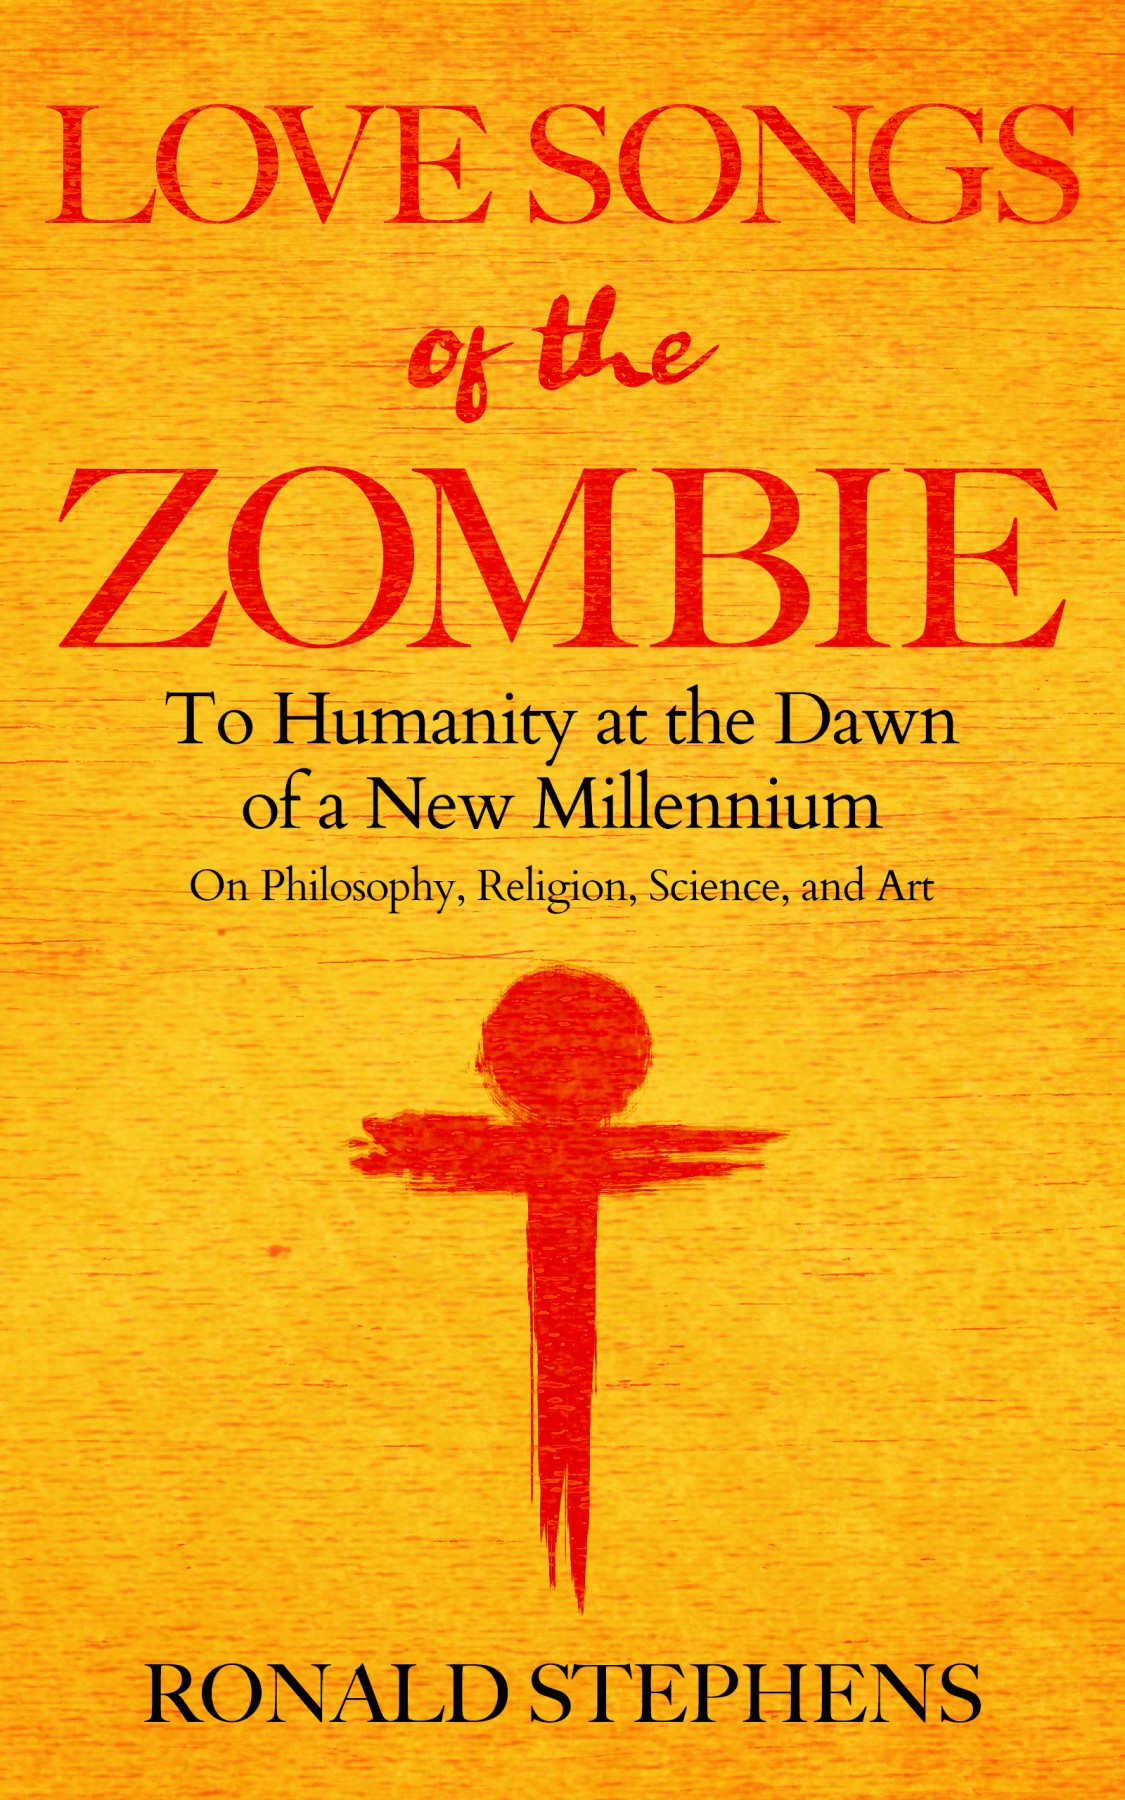 The front cover of Love Songs of the Zombie: To Humanity at the Dawn of a New Millennium on Philosophy, Religion, Science, and Art by Ronald Stephens